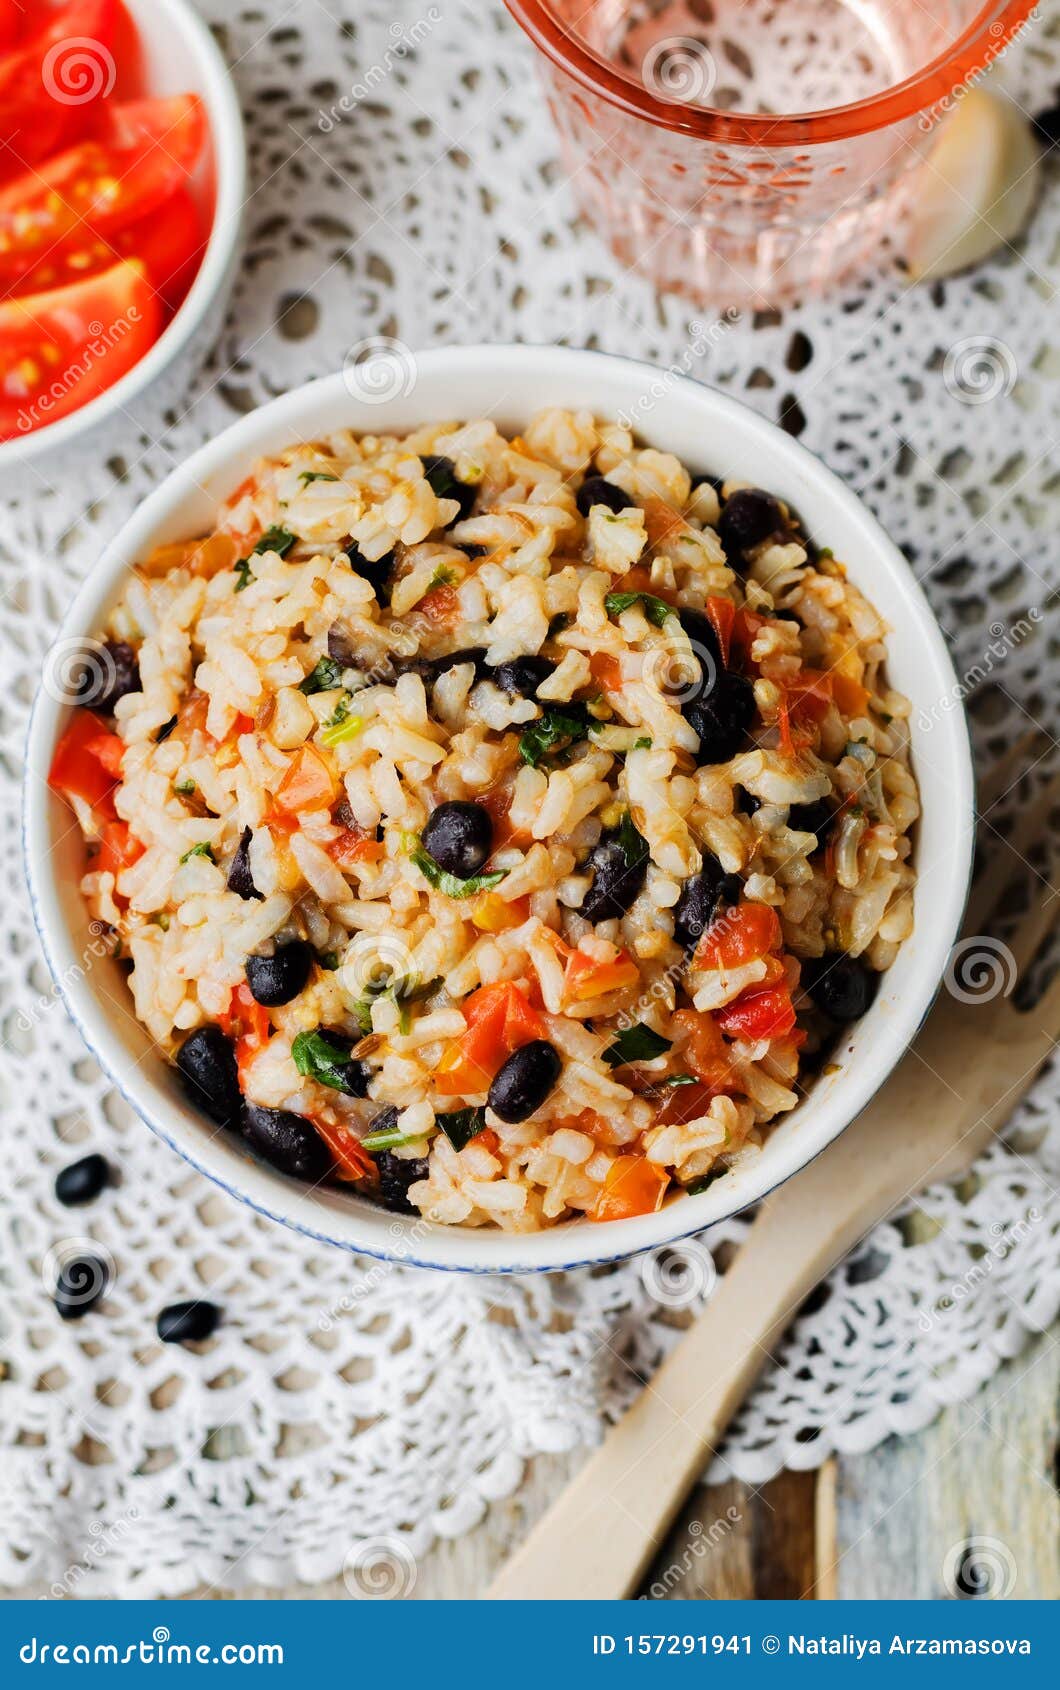 Mexican Tomato Black Beans Rice with Cilantro Stock Image - Image of ...